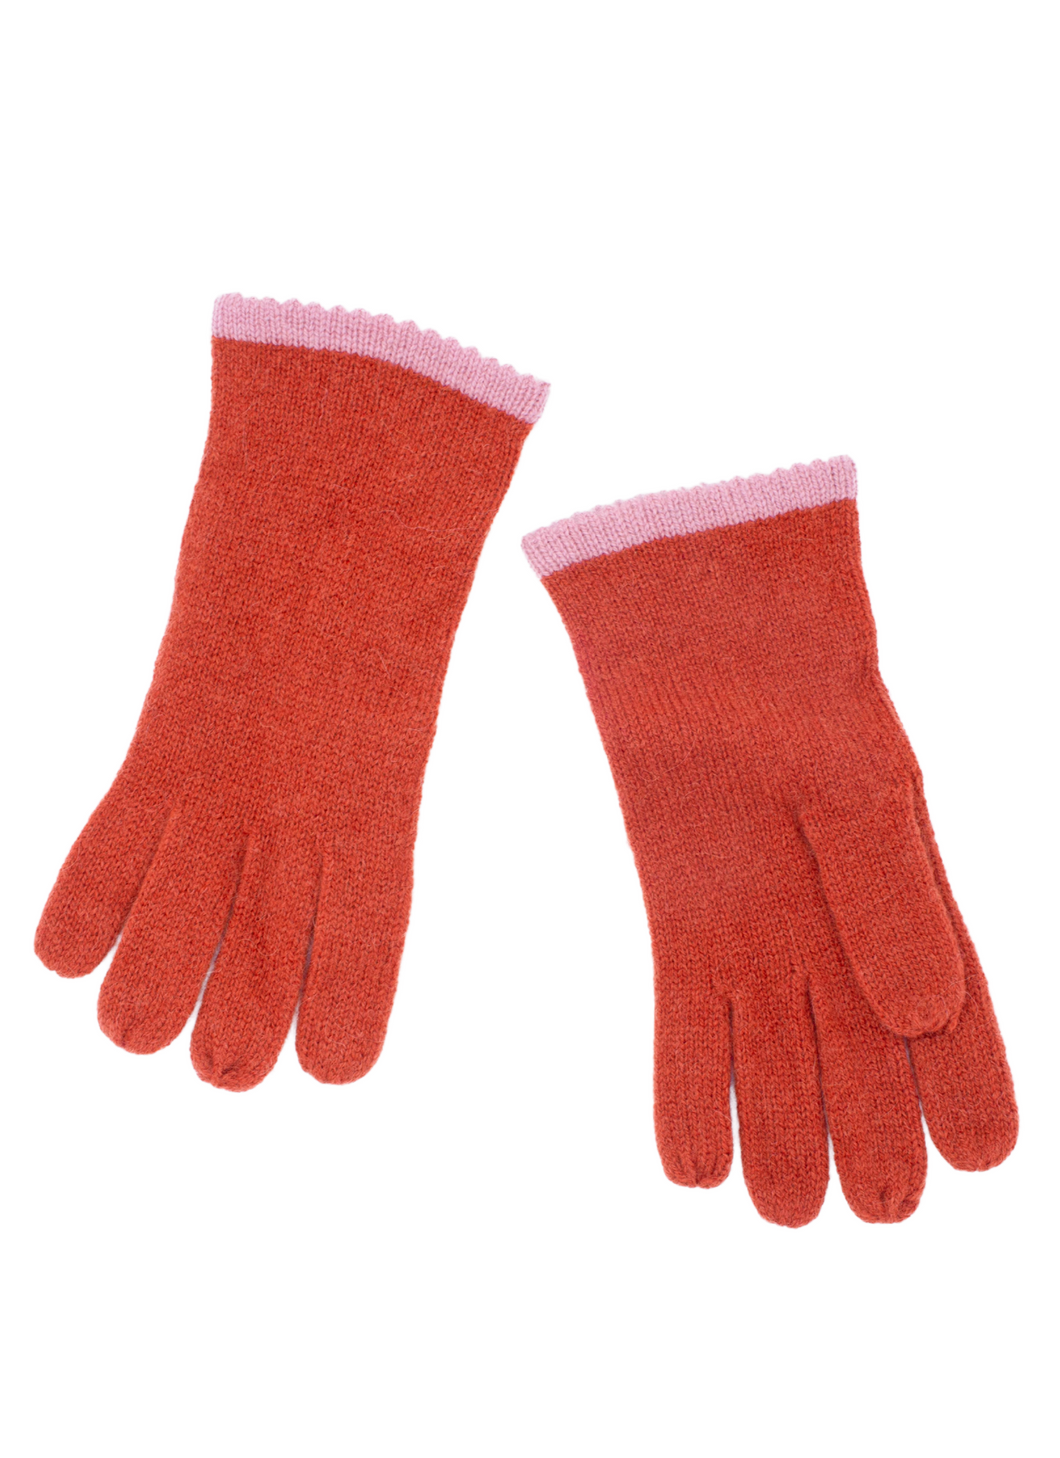 Alpaca Gloves - Holly Red + Pale Pink